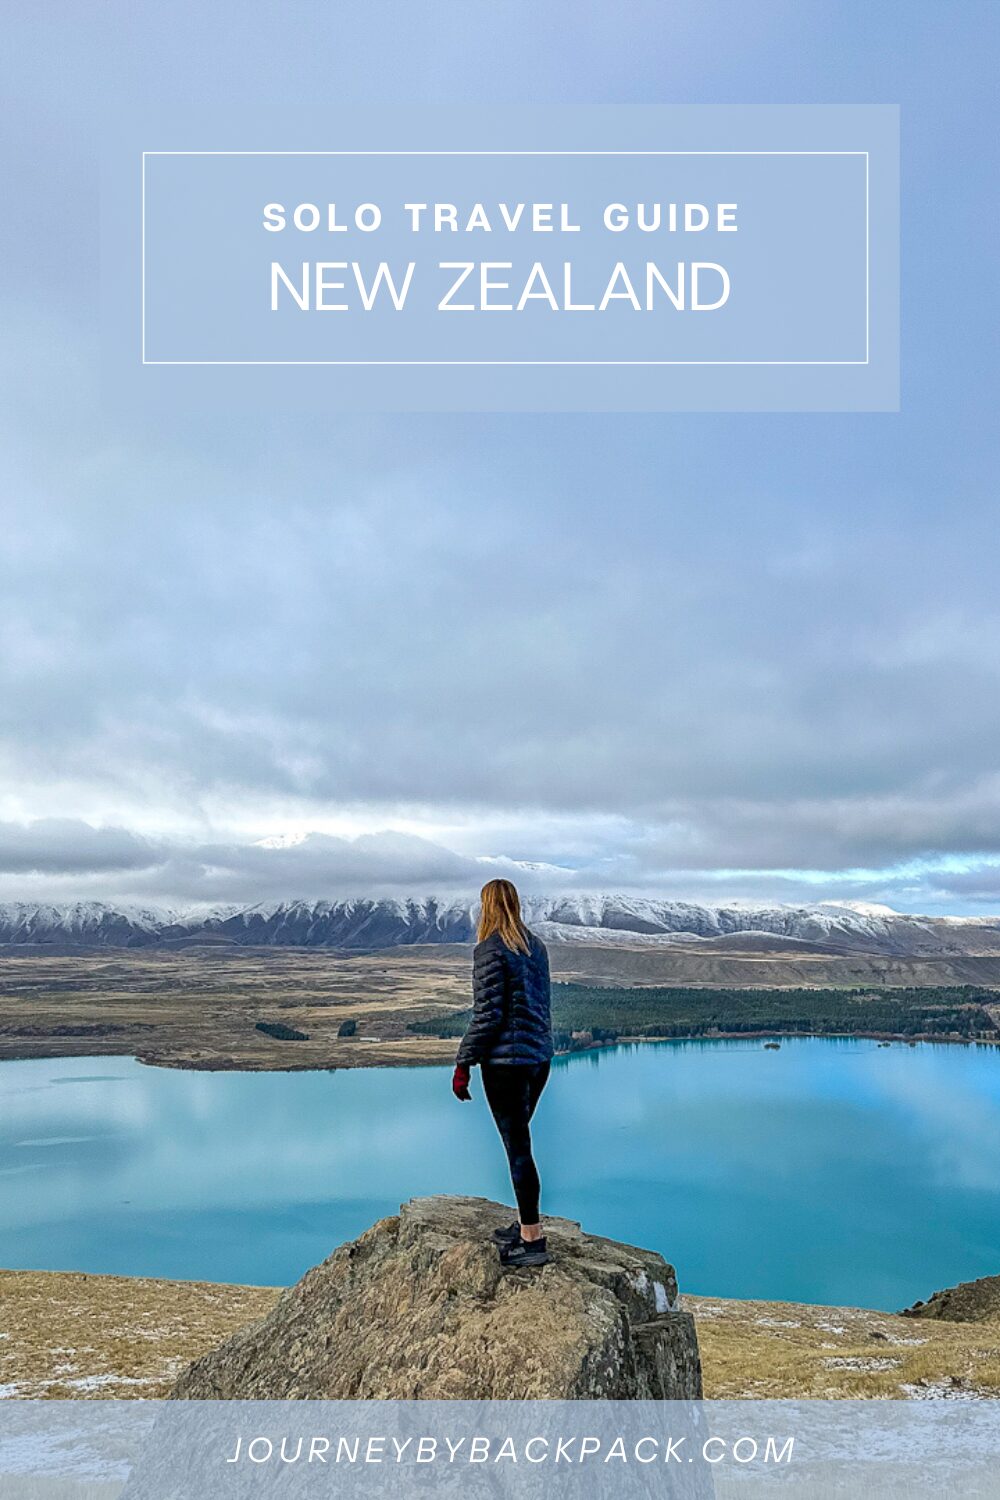 Solo travel in New Zealand